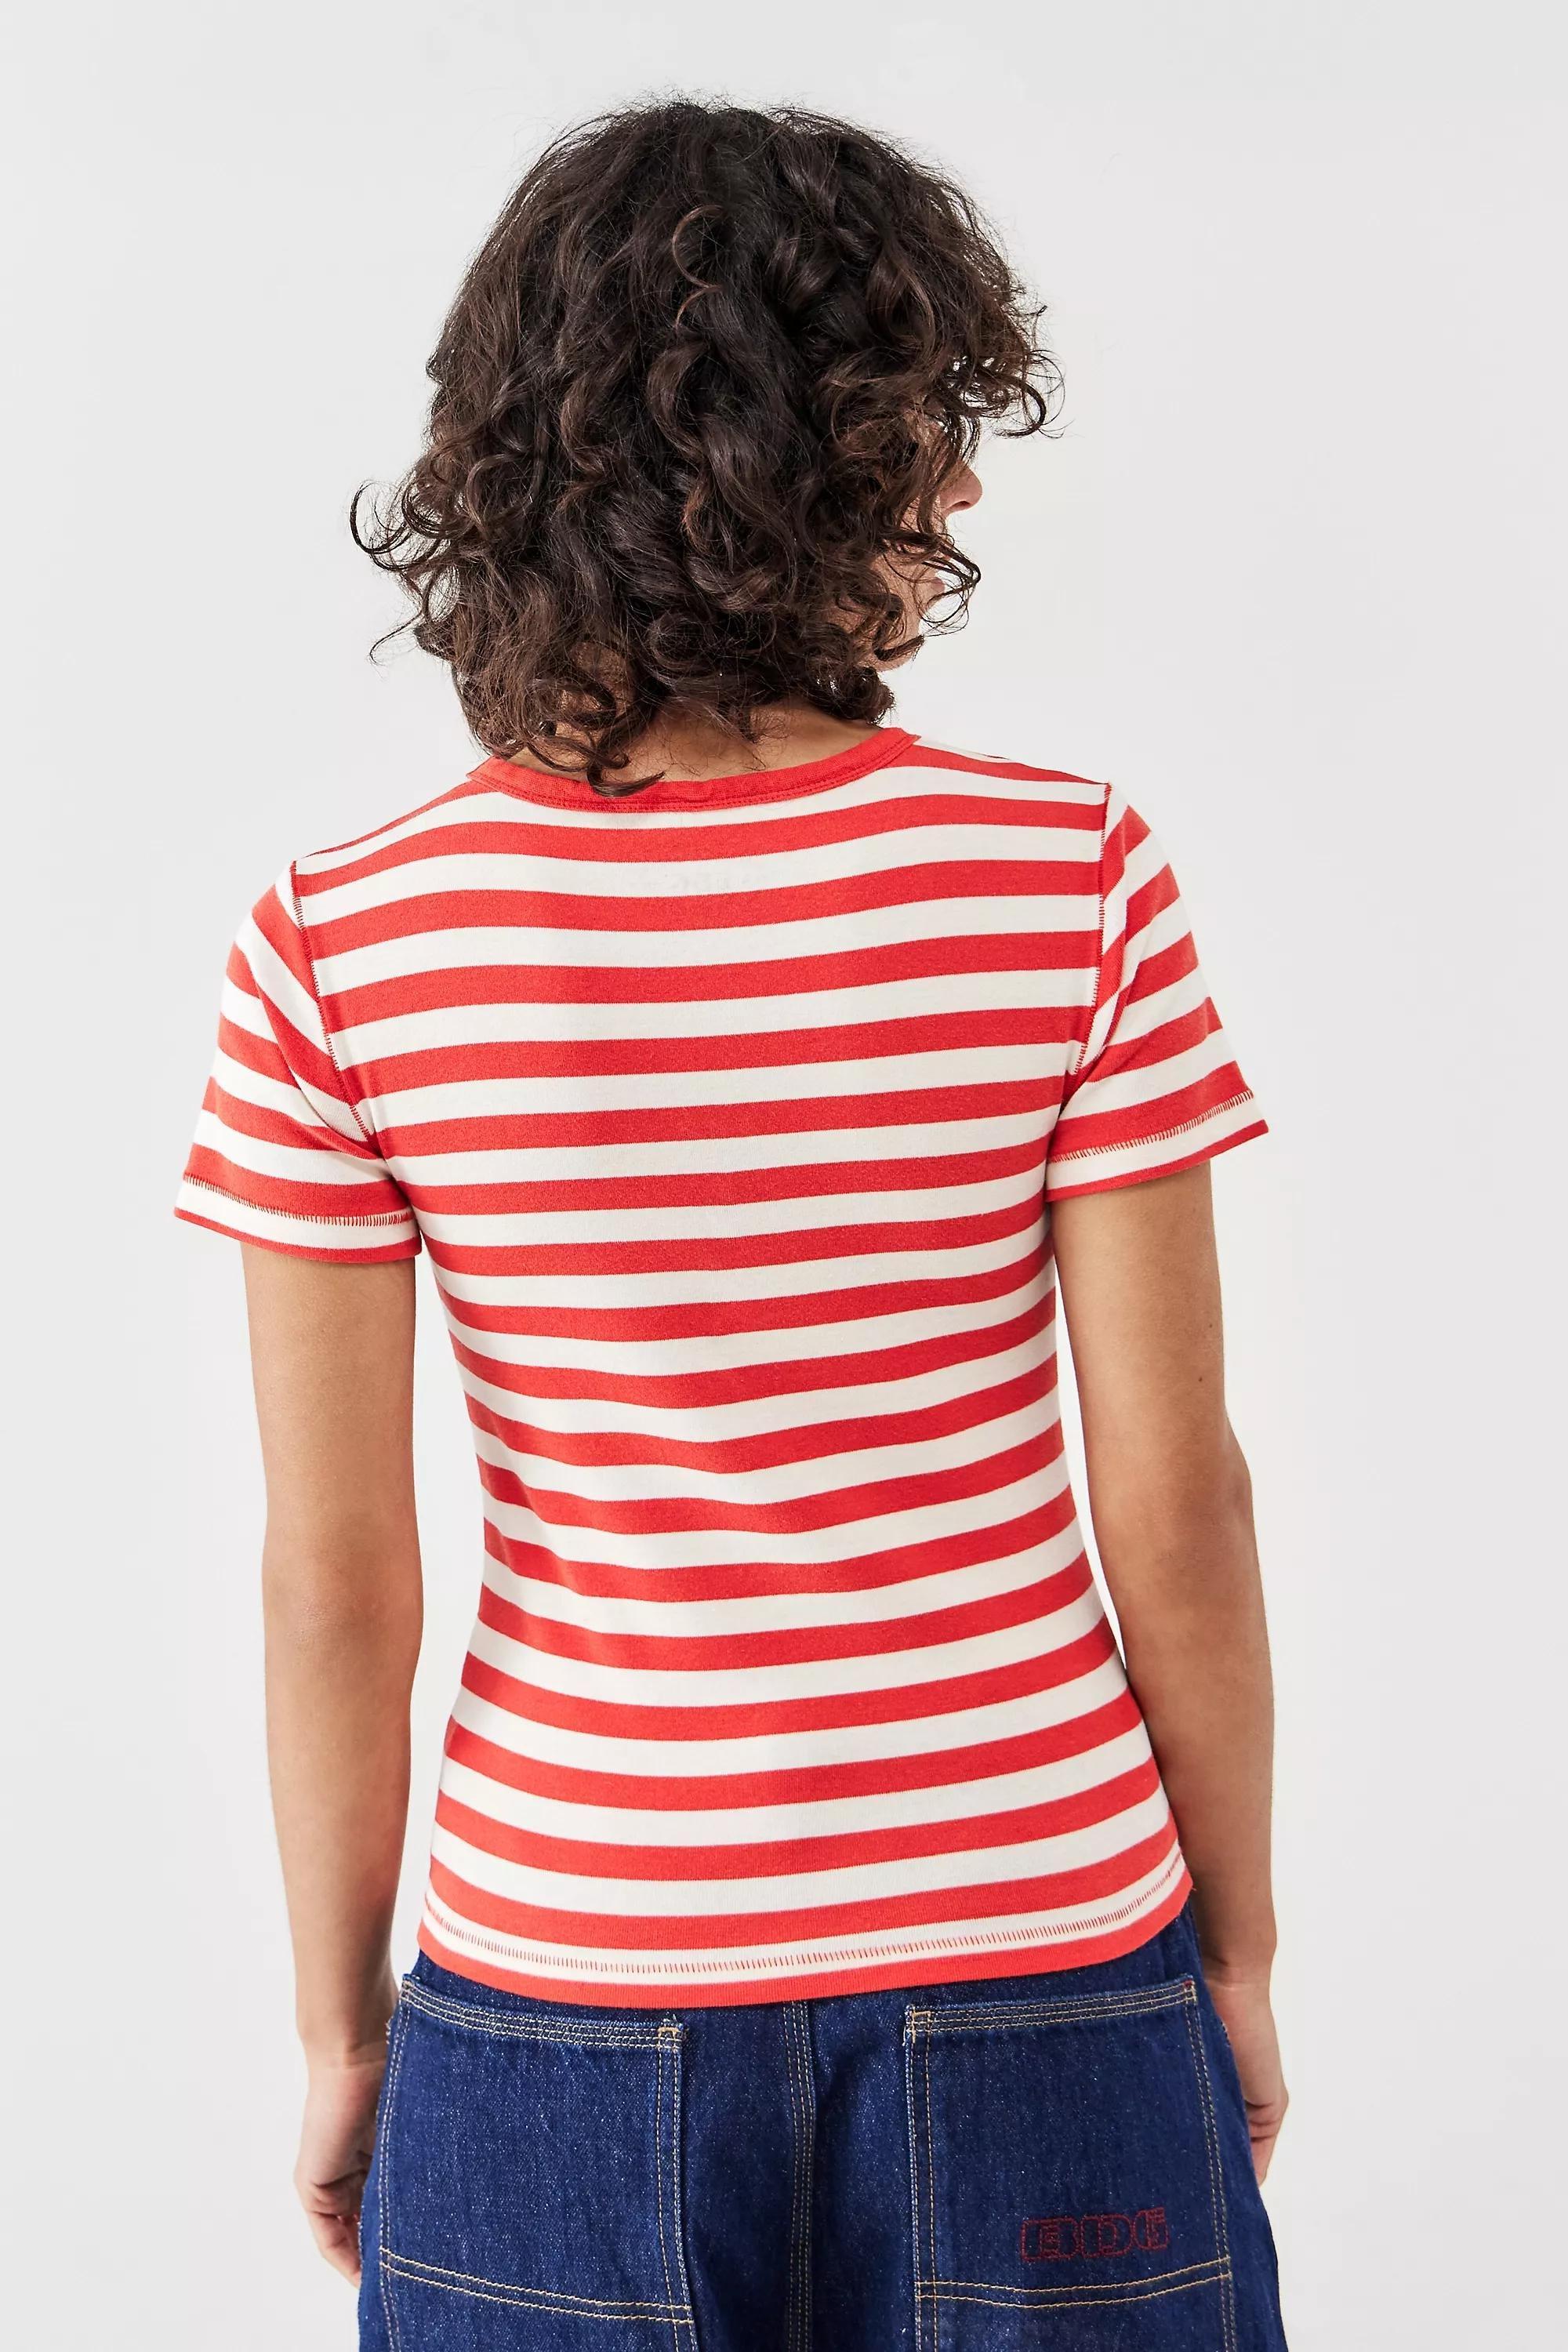 Urban Outfitters - Red Bdg Striped Baby T-Shirt